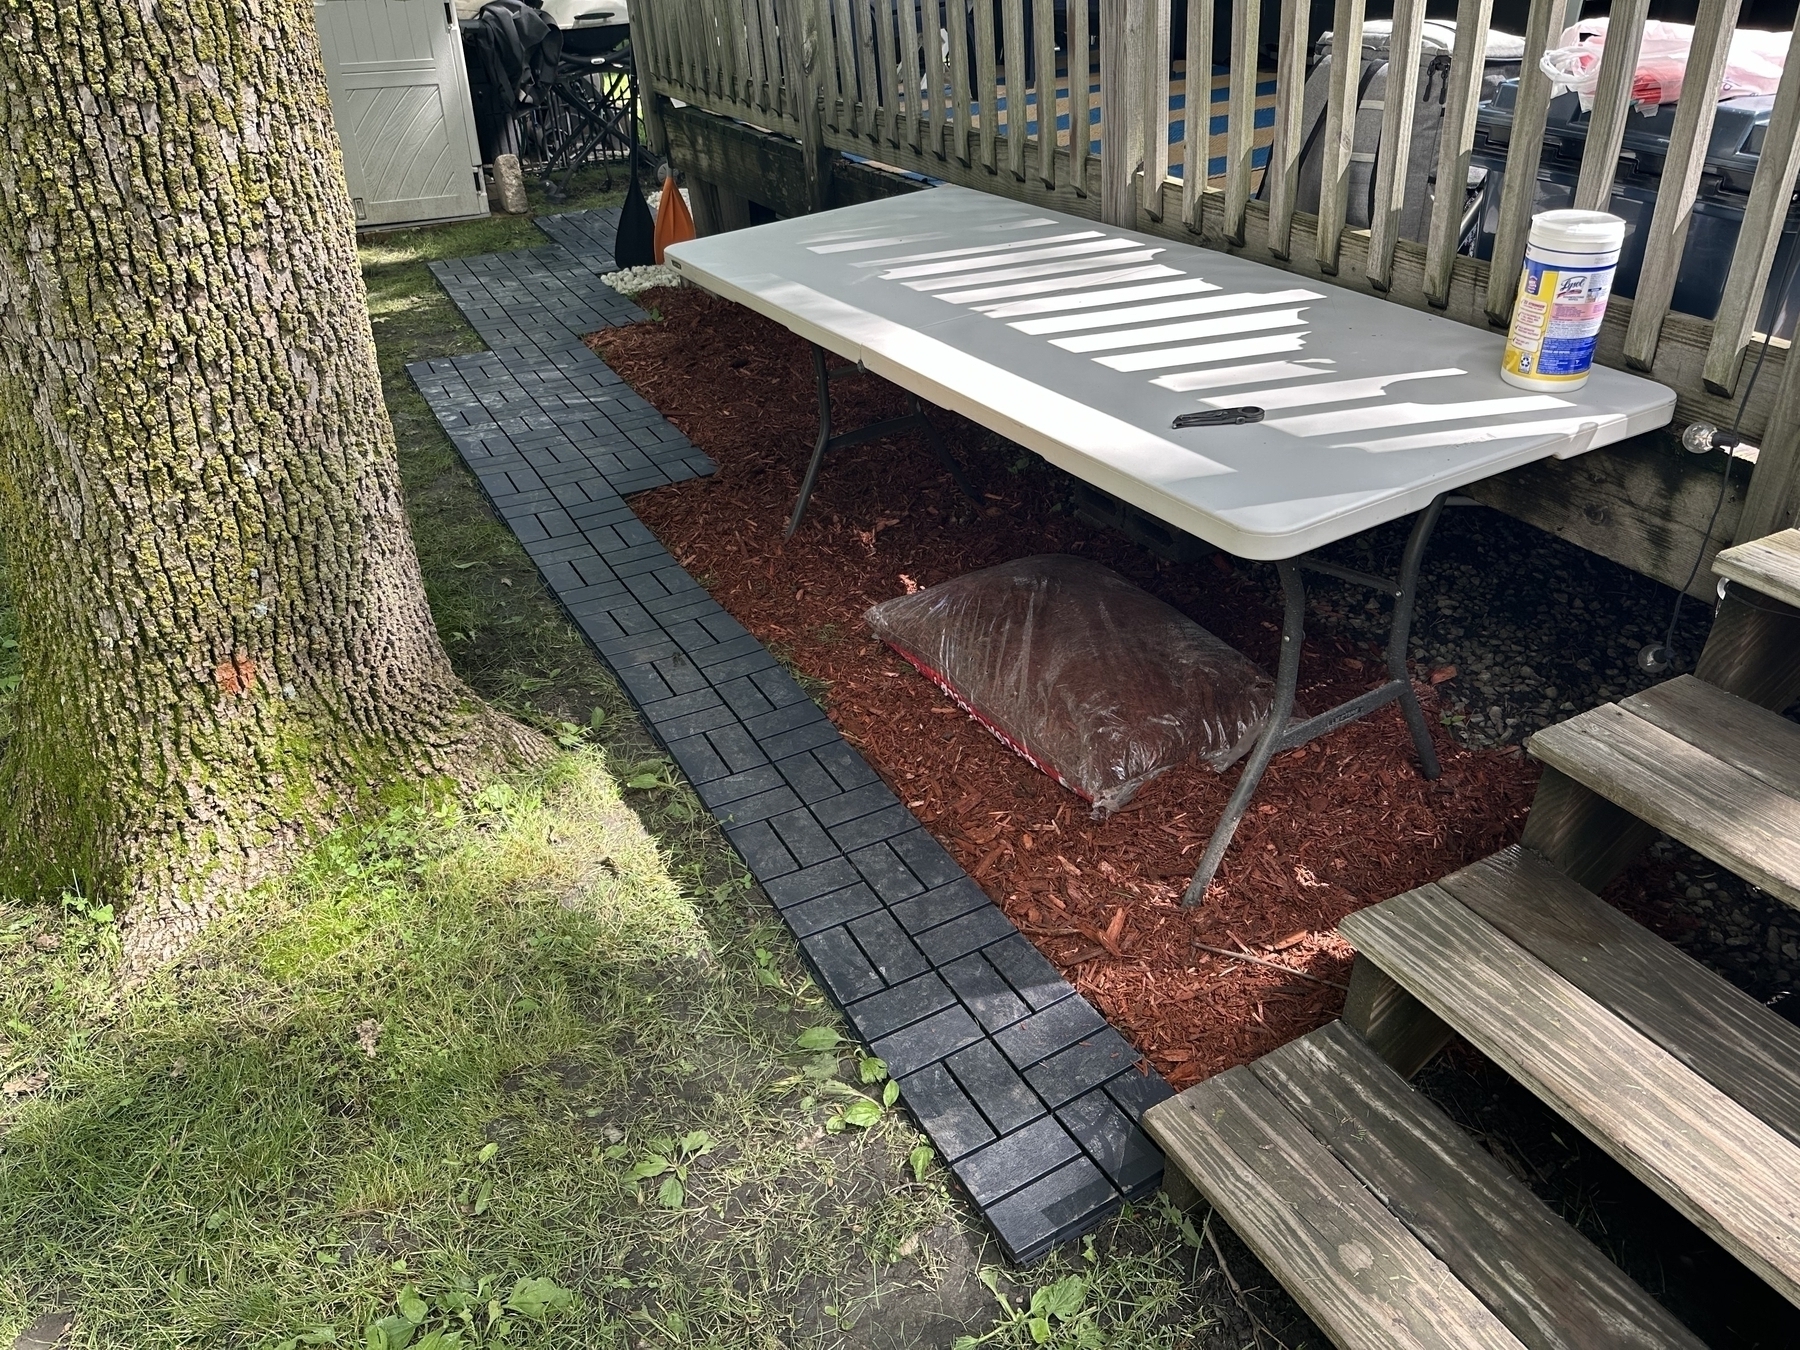 Plastic folding table with items on top including a canister placed alongside garden mulch bag beneath in an outdoor setting next to a patio deck and large tree.